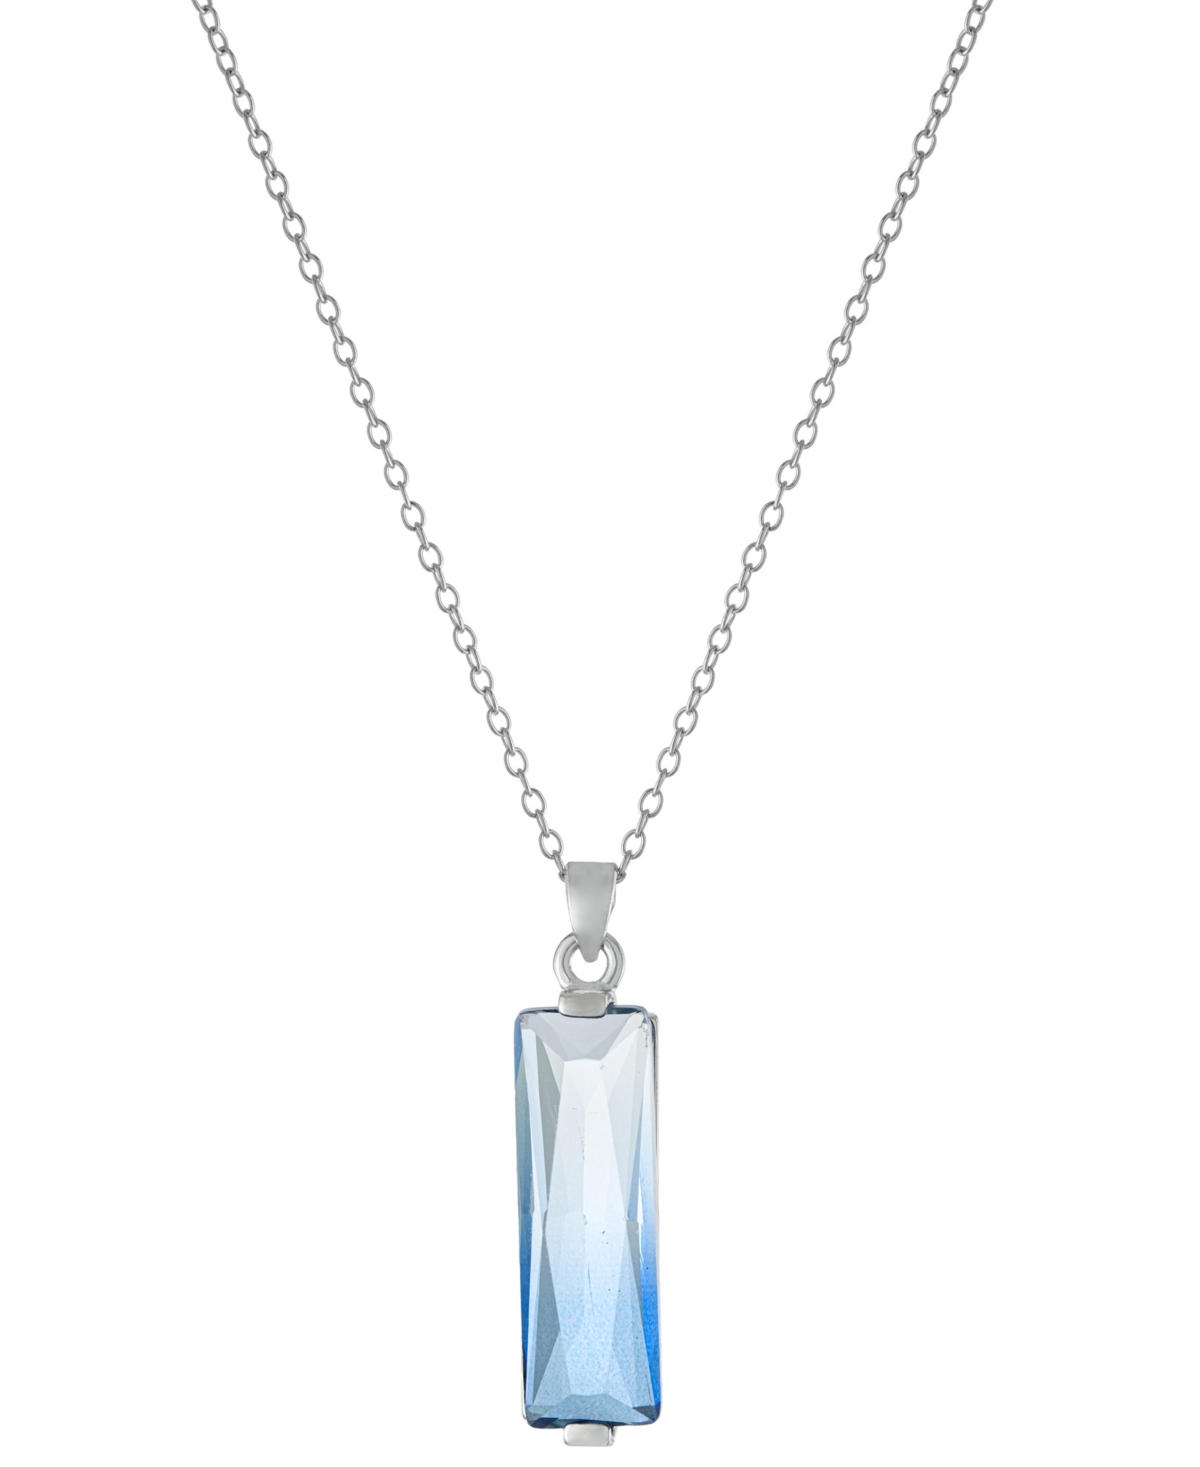 Ombre Crystal Pendant Necklace in Sterling Silver, 16" + 2" extender, Created for Macy's - Sterling Silver